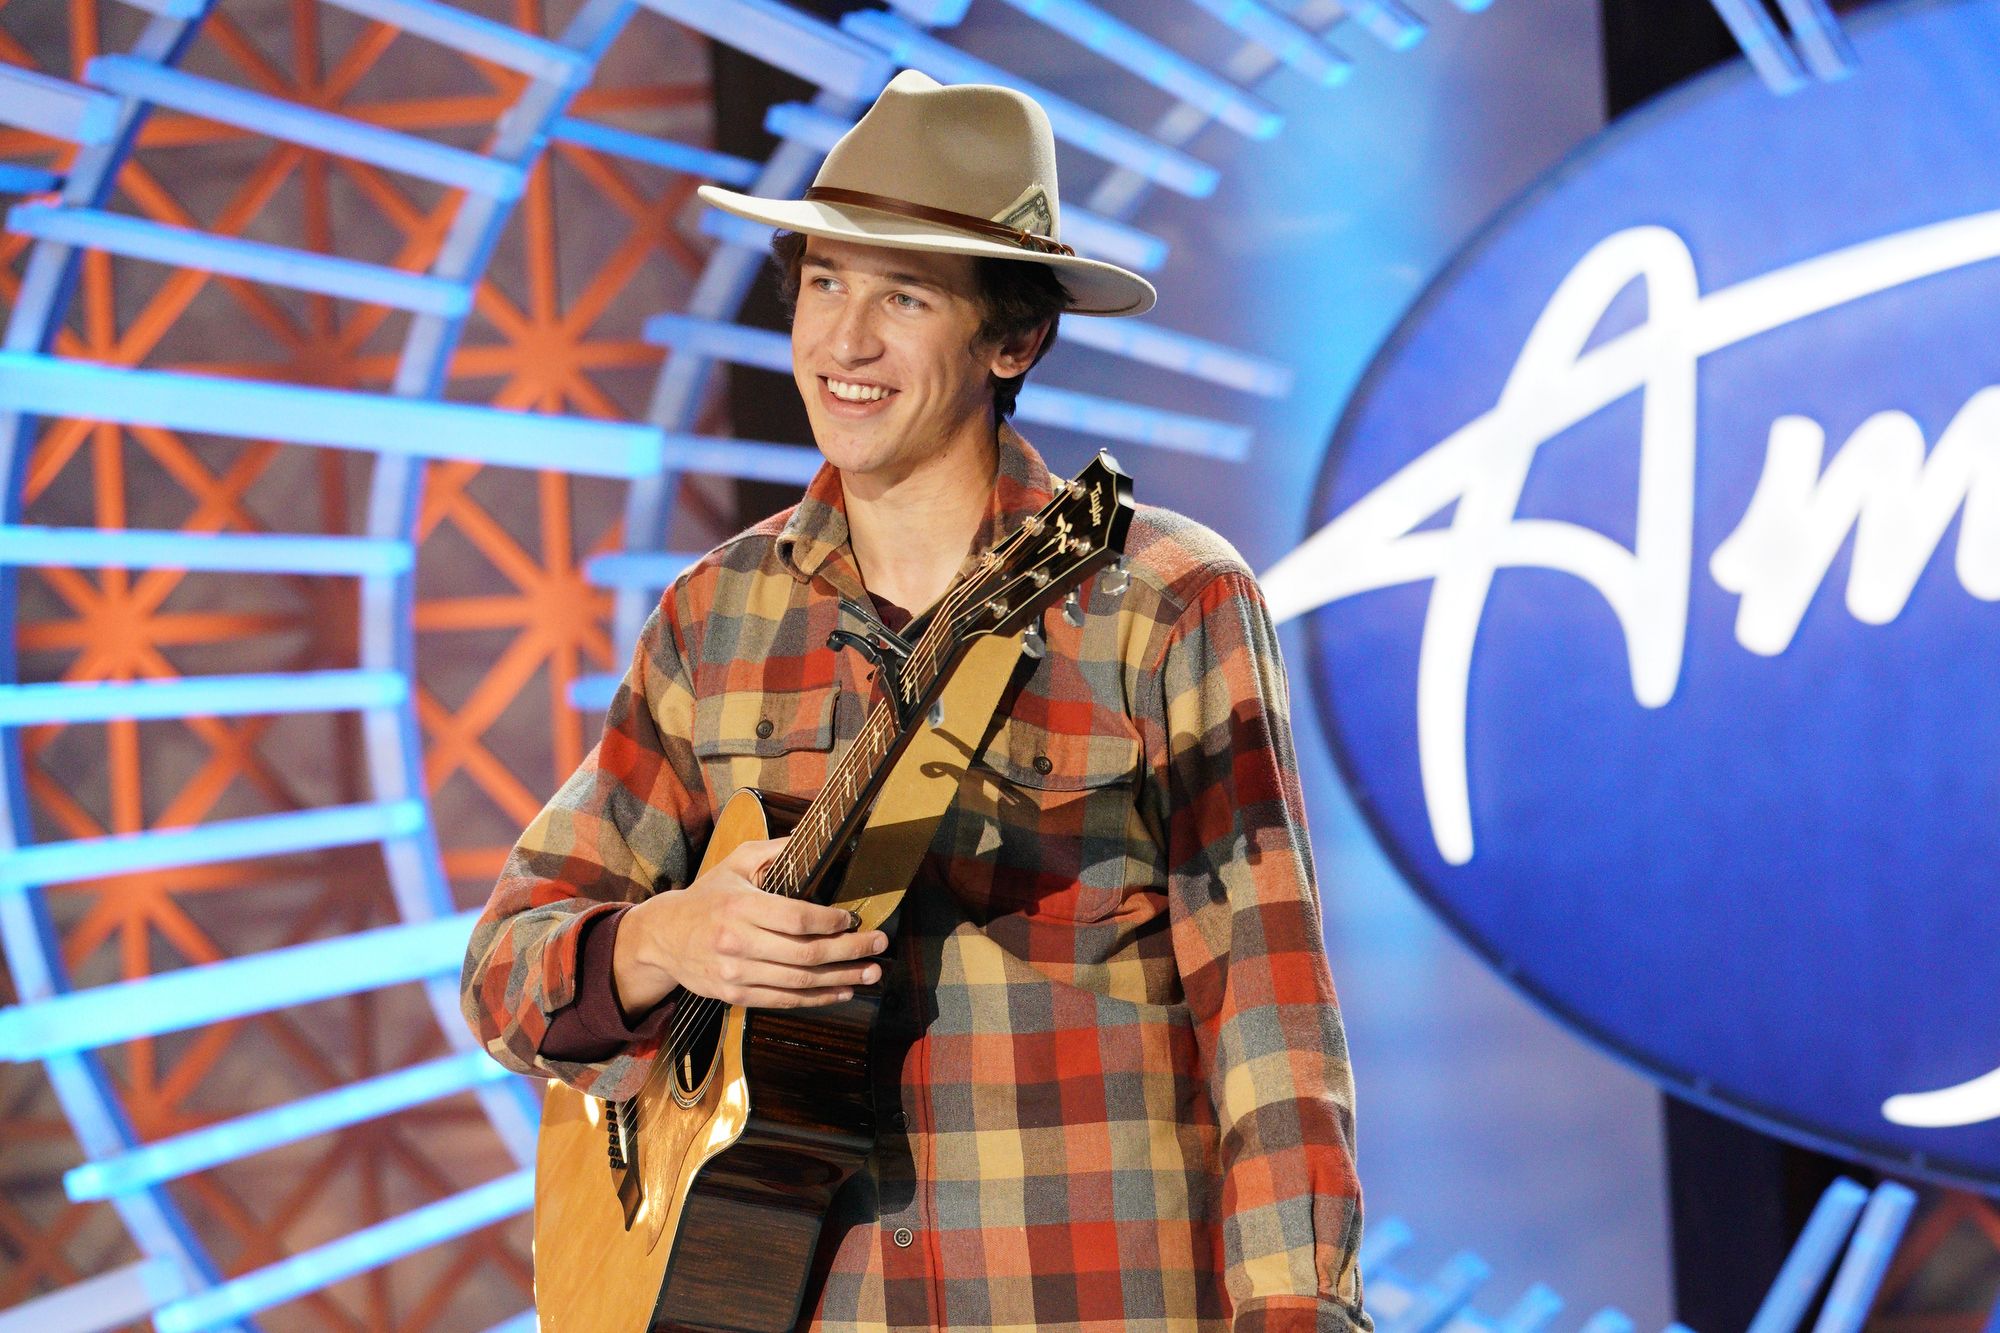 Why Did Wyatt Pike Drop Out Of American Idol Source Explains Why